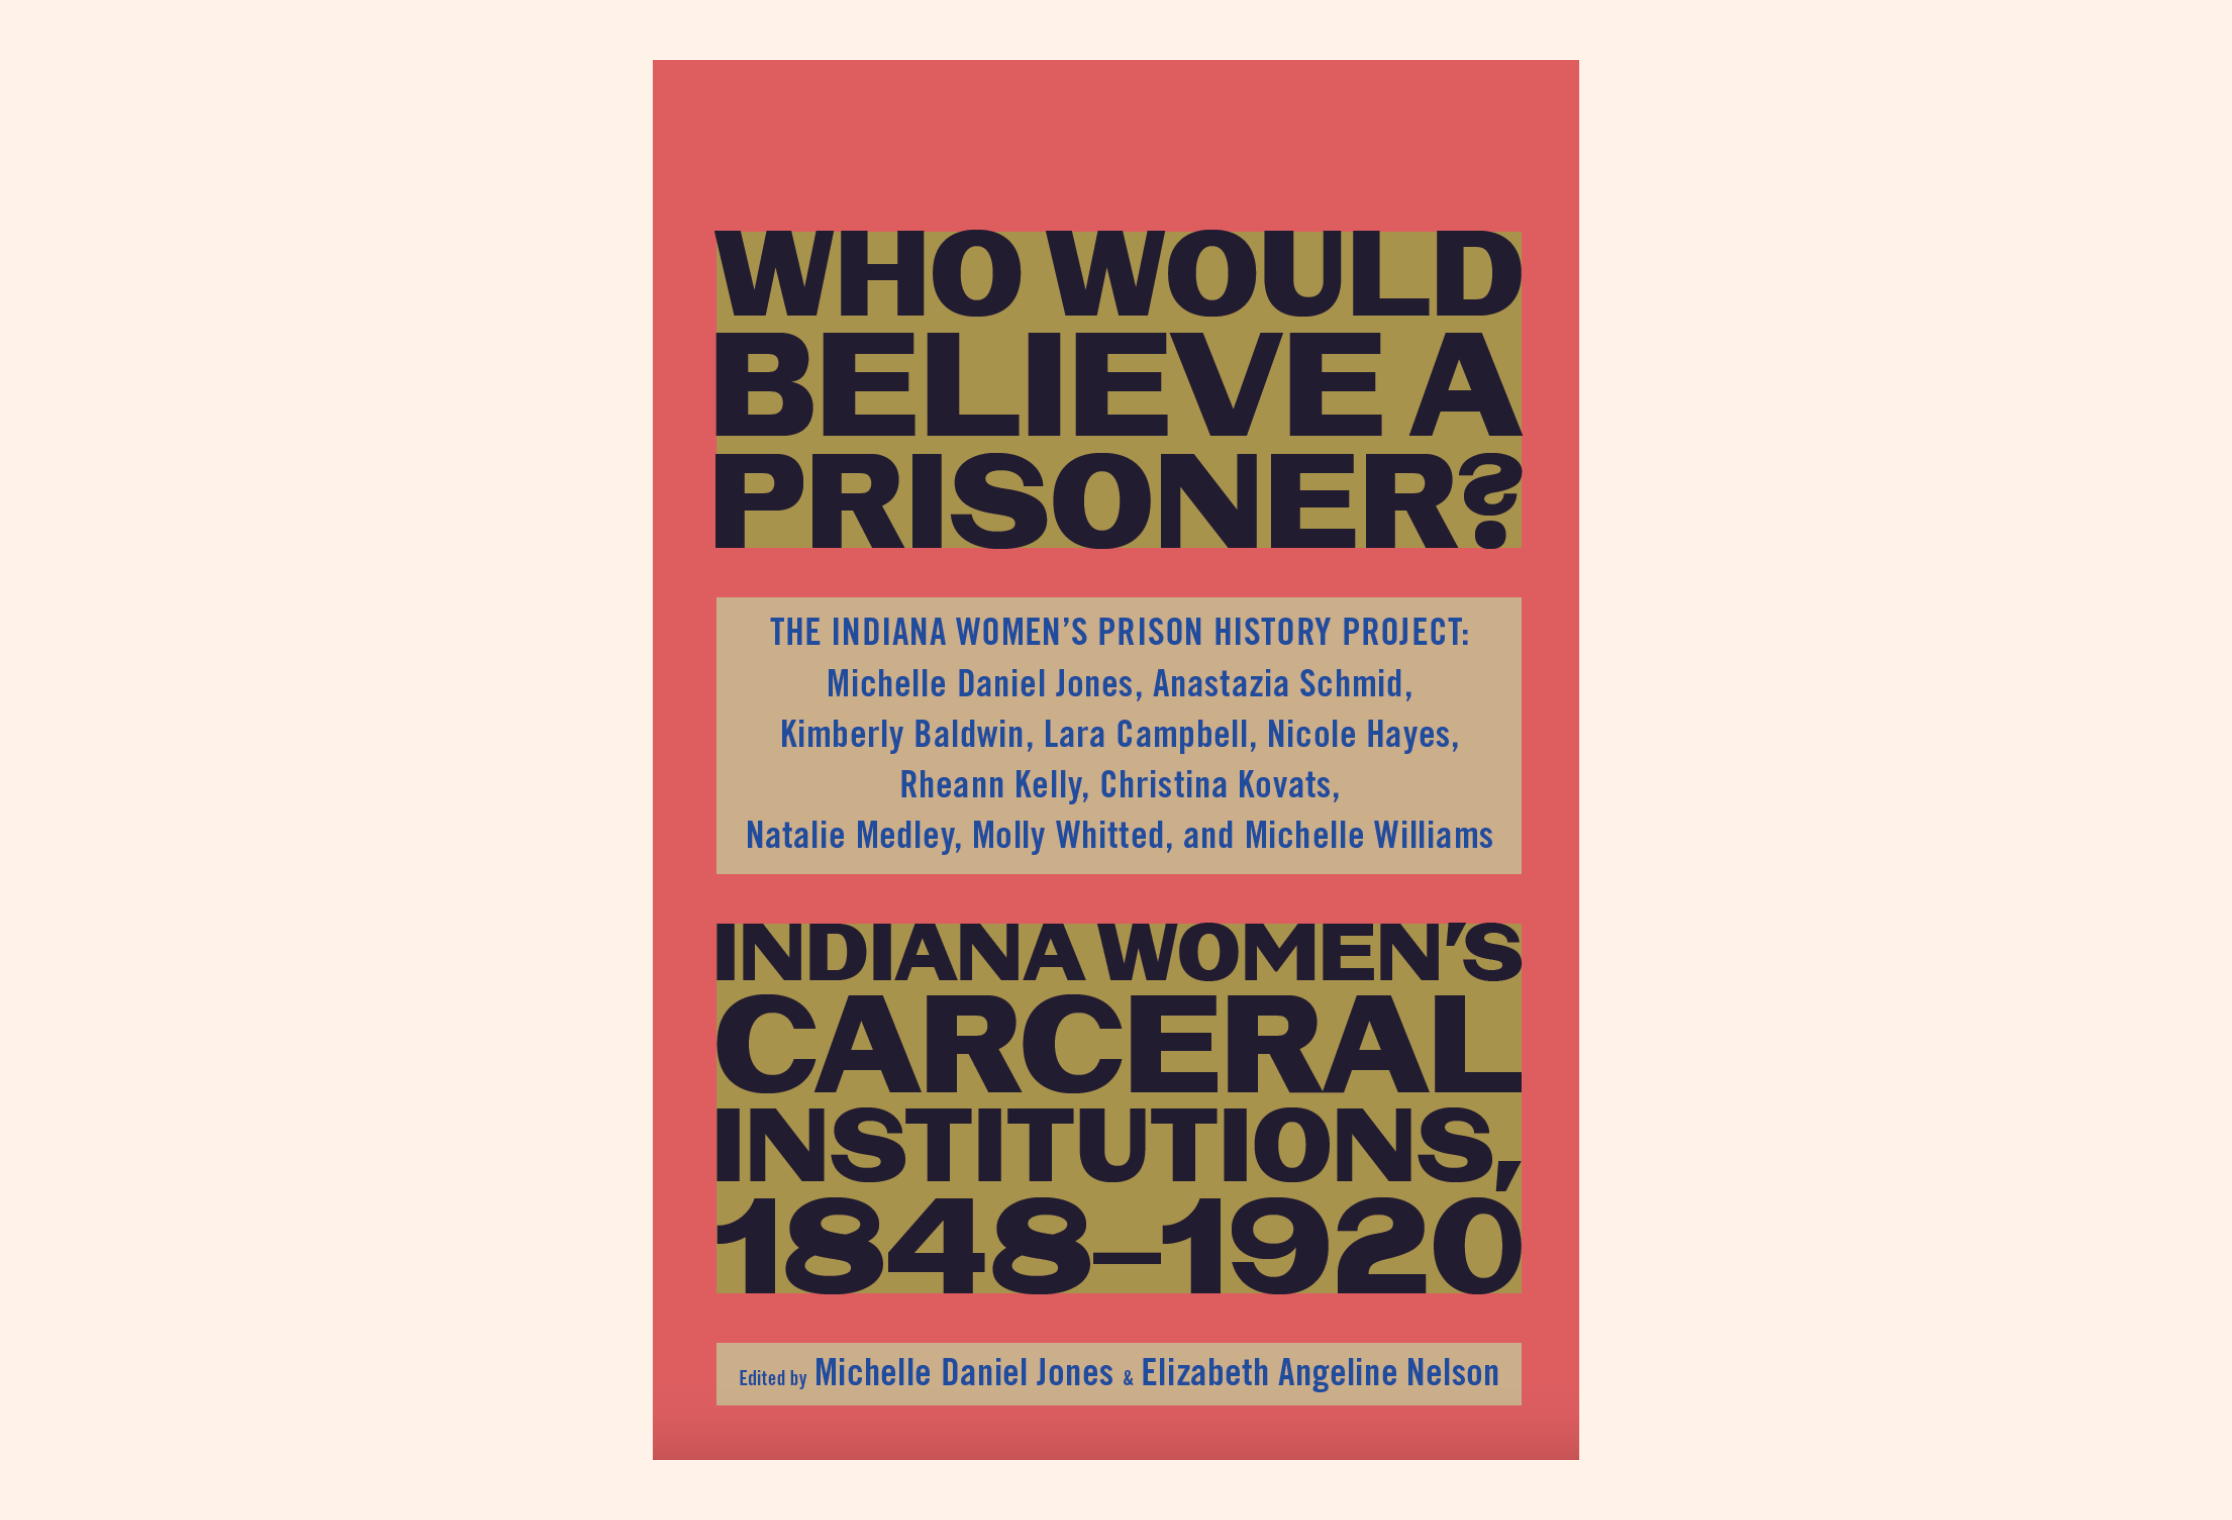 Cover of “Who Would Believe A Prisoner?: Indiana Women’s Carceral Institutions, 1848-1920”, 2023. (The New Press)